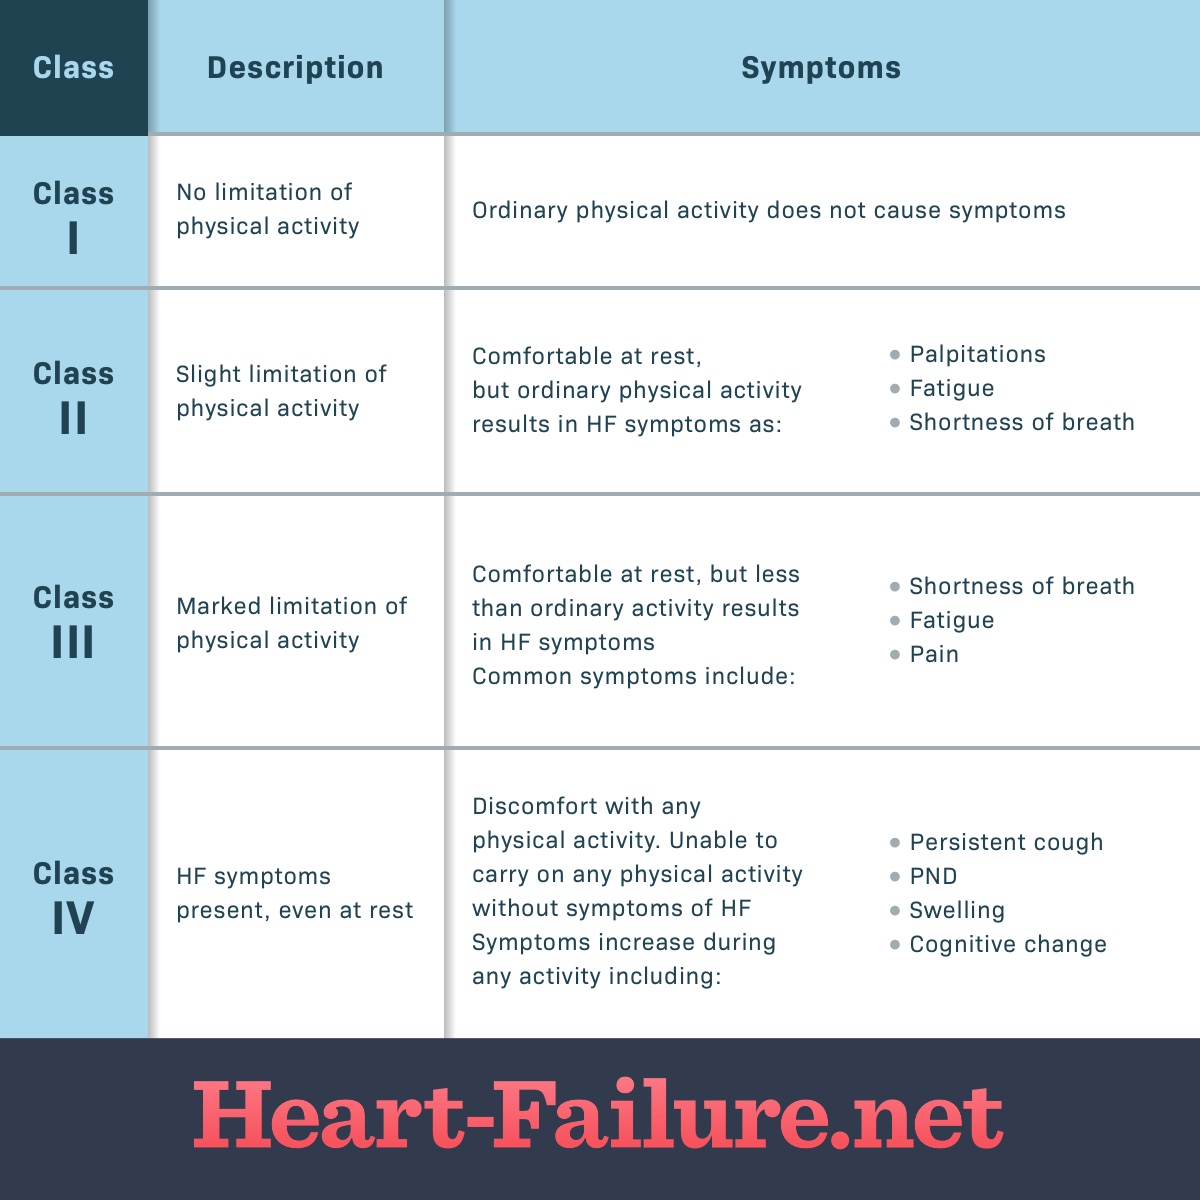 A chart showing the symptoms heart failure by class